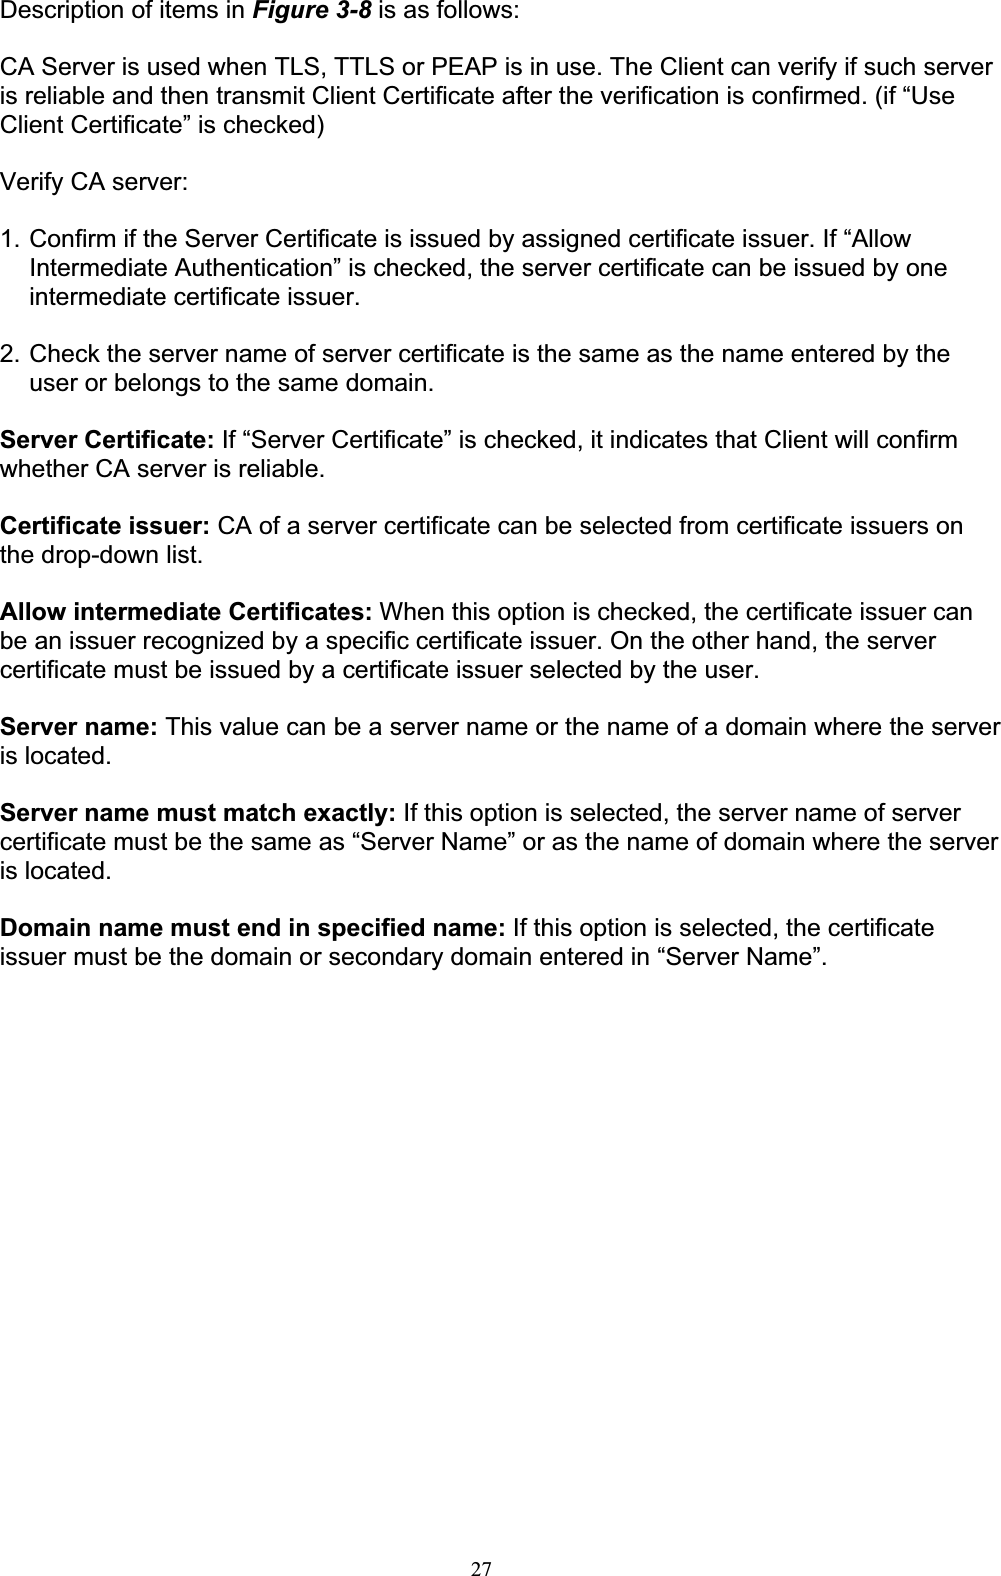 27Description of items in Figure 3-8 is as follows: CA Server is used when TLS, TTLS or PEAP is in use. The Client can verify if such server is reliable and then transmit Client Certificate after the verification is confirmed. (if “Use Client Certificate” is checked) Verify CA server:1. Confirm if the Server Certificate is issued by assigned certificate issuer. If “Allow Intermediate Authentication” is checked, the server certificate can be issued by one intermediate certificate issuer. 2. Check the server name of server certificate is the same as the name entered by the user or belongs to the same domain. Server Certificate: If “Server Certificate” is checked, it indicates that Client will confirm whether CA server is reliable.Certificate issuer: CA of a server certificate can be selected from certificate issuers on the drop-down list. Allow intermediate Certificates: When this option is checked, the certificate issuer can be an issuer recognized by a specific certificate issuer. On the other hand, the server certificate must be issued by a certificate issuer selected by the user. Server name: This value can be a server name or the name of a domain where the server is located. Server name must match exactly: If this option is selected, the server name of server certificate must be the same as “Server Name” or as the name of domain where the server is located. Domain name must end in specified name: If this option is selected, the certificate issuer must be the domain or secondary domain entered in “Server Name”. 